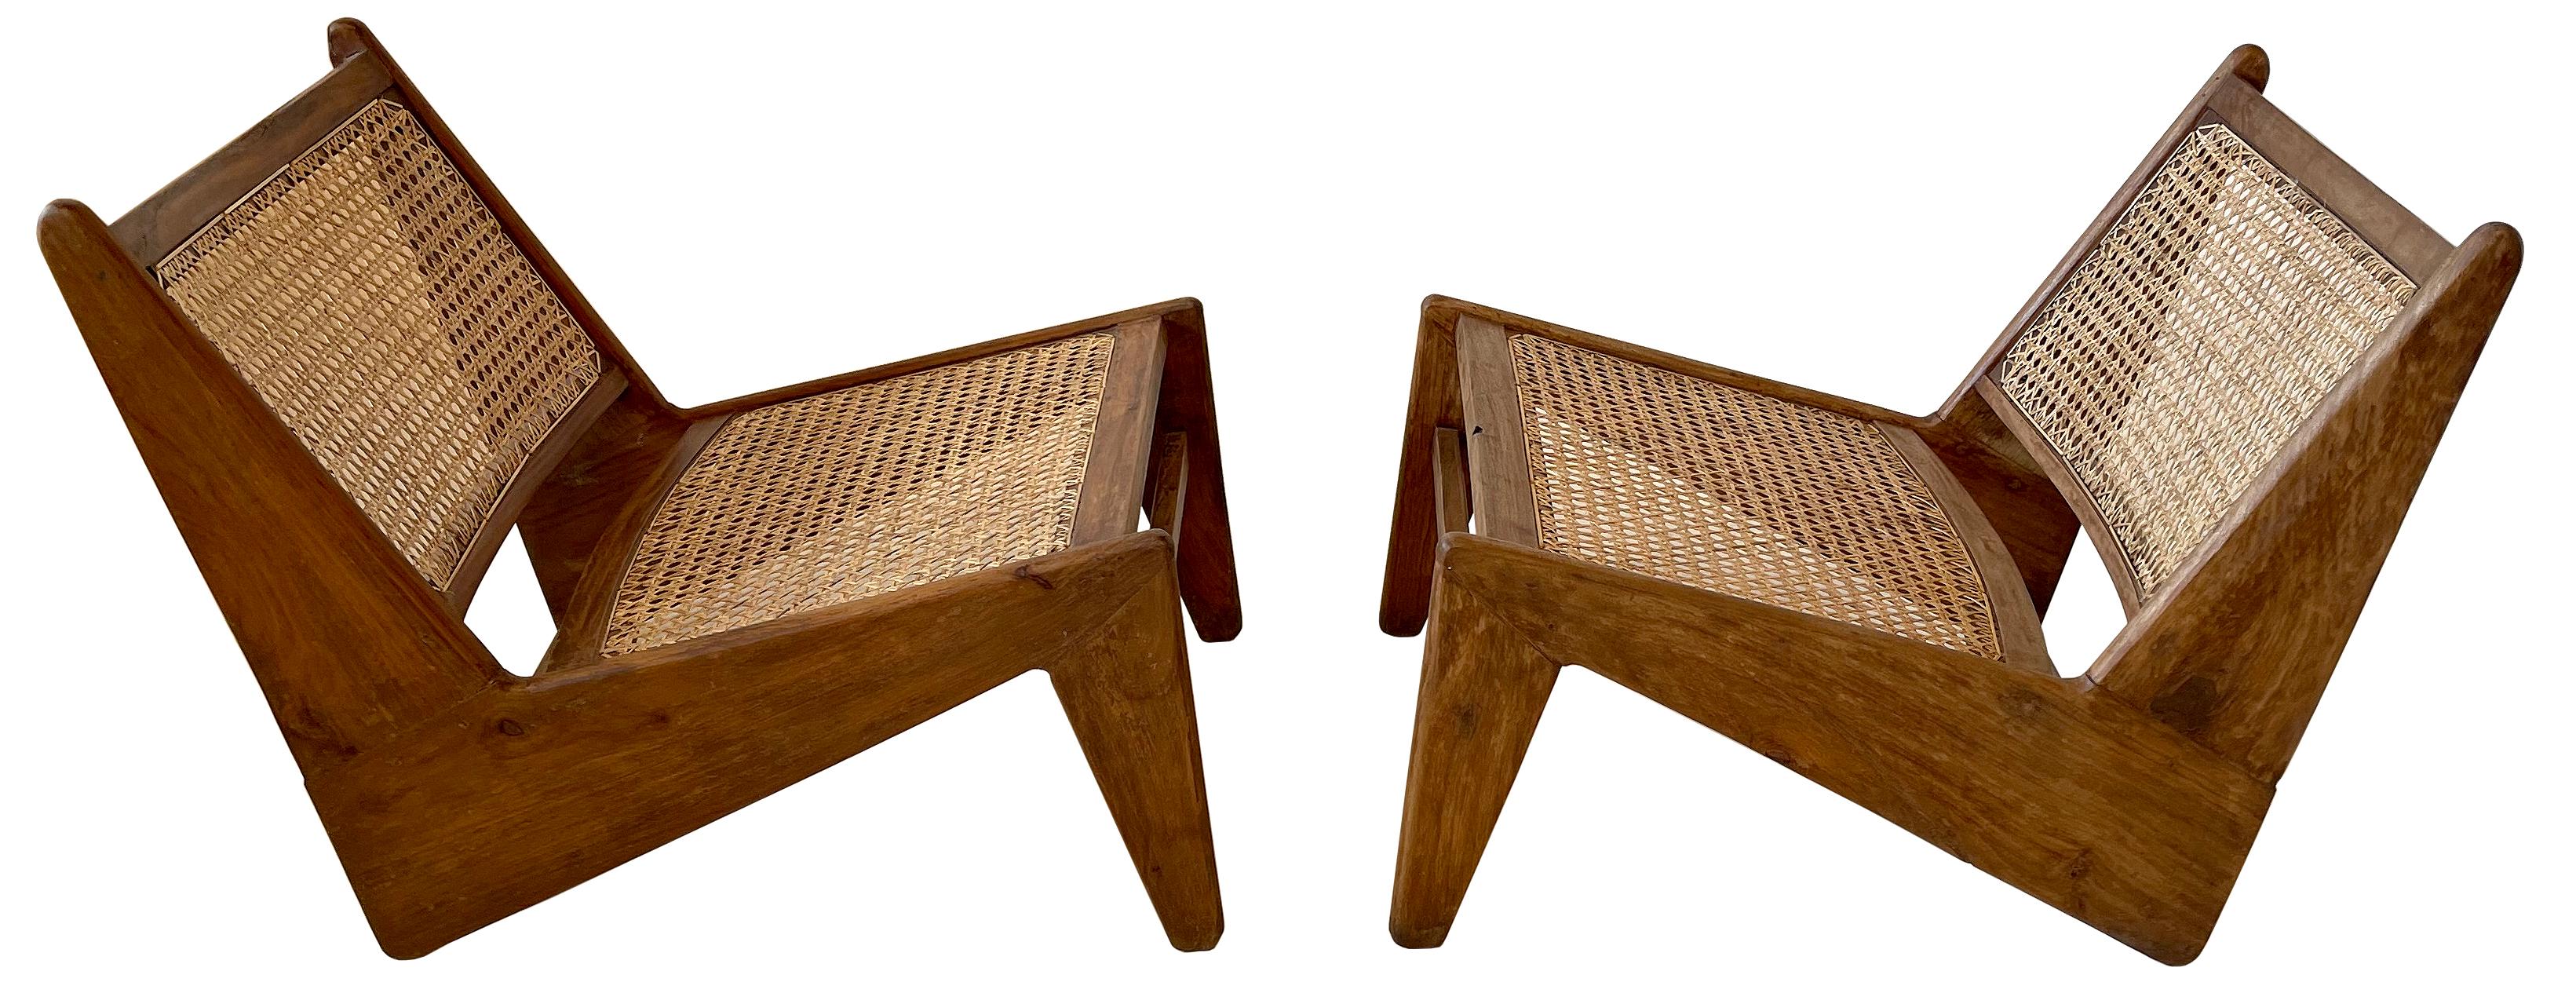 A really terrific pair of rare low lounge chairs in teak and Indian Sissoo wood.

A true matched pair as indicated by the numbered designation on the rear of the seat-backs. 
In beautiful sympathetically restored condition. Secured and shored